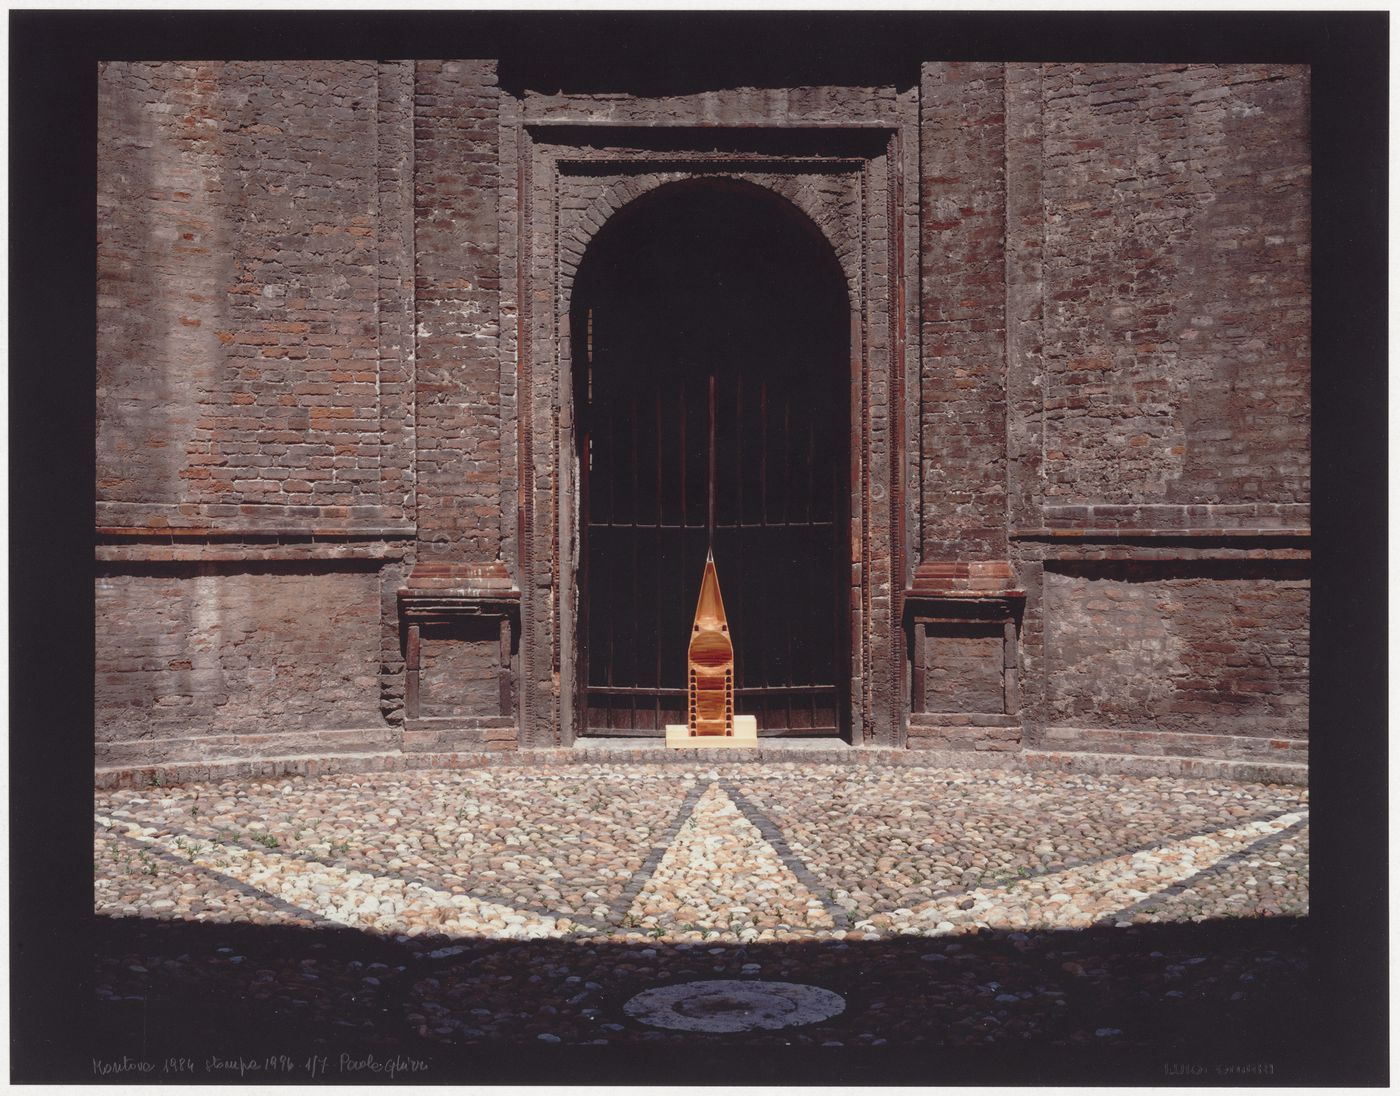 Model for the tower of the Convention Centre in Milan, 1982, exhibited at the Casa del Mantegna, Mantua